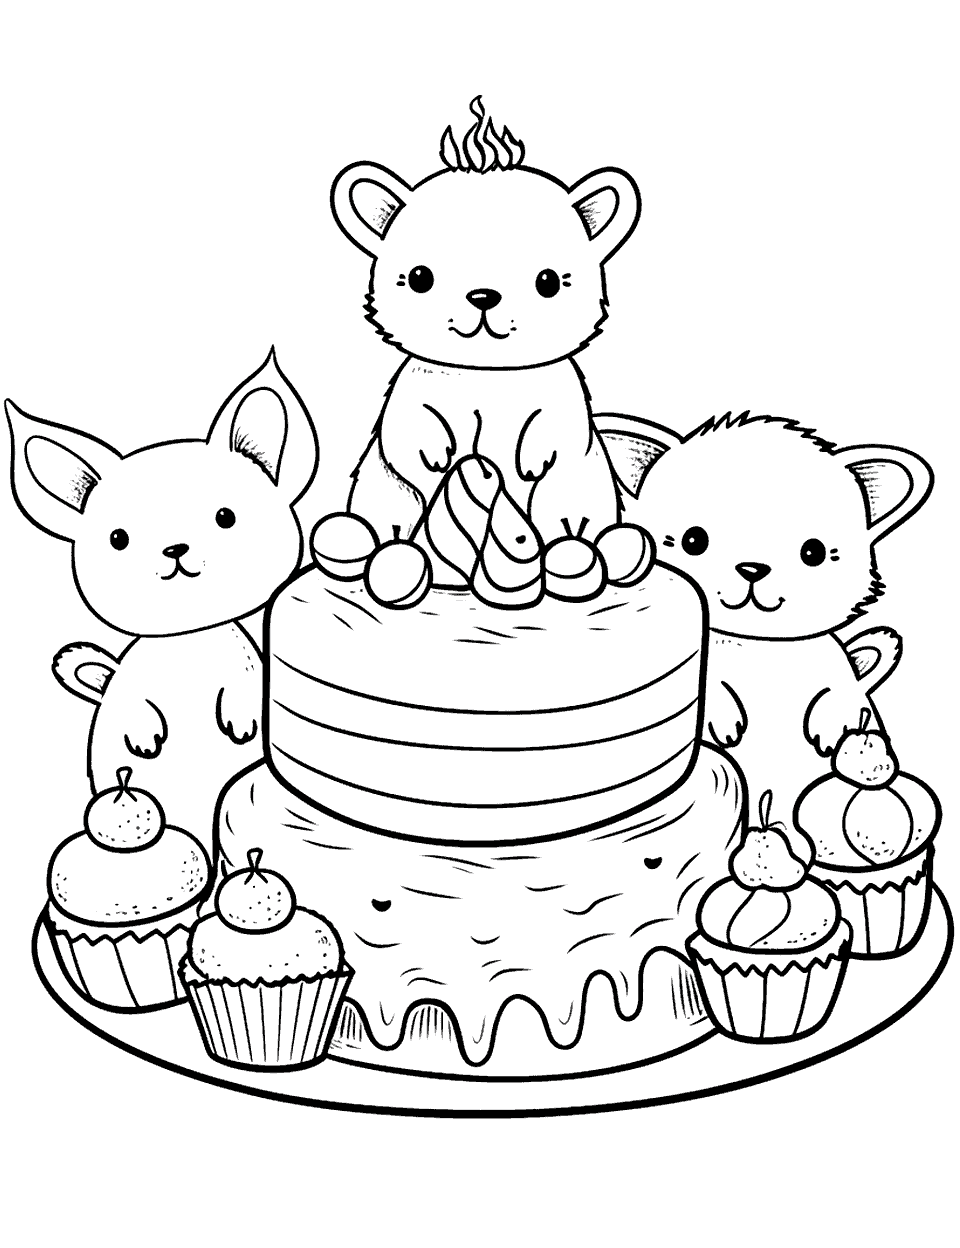 Cute Animal Party Cake Coloring Page - A small cake surrounded by various cute animals.